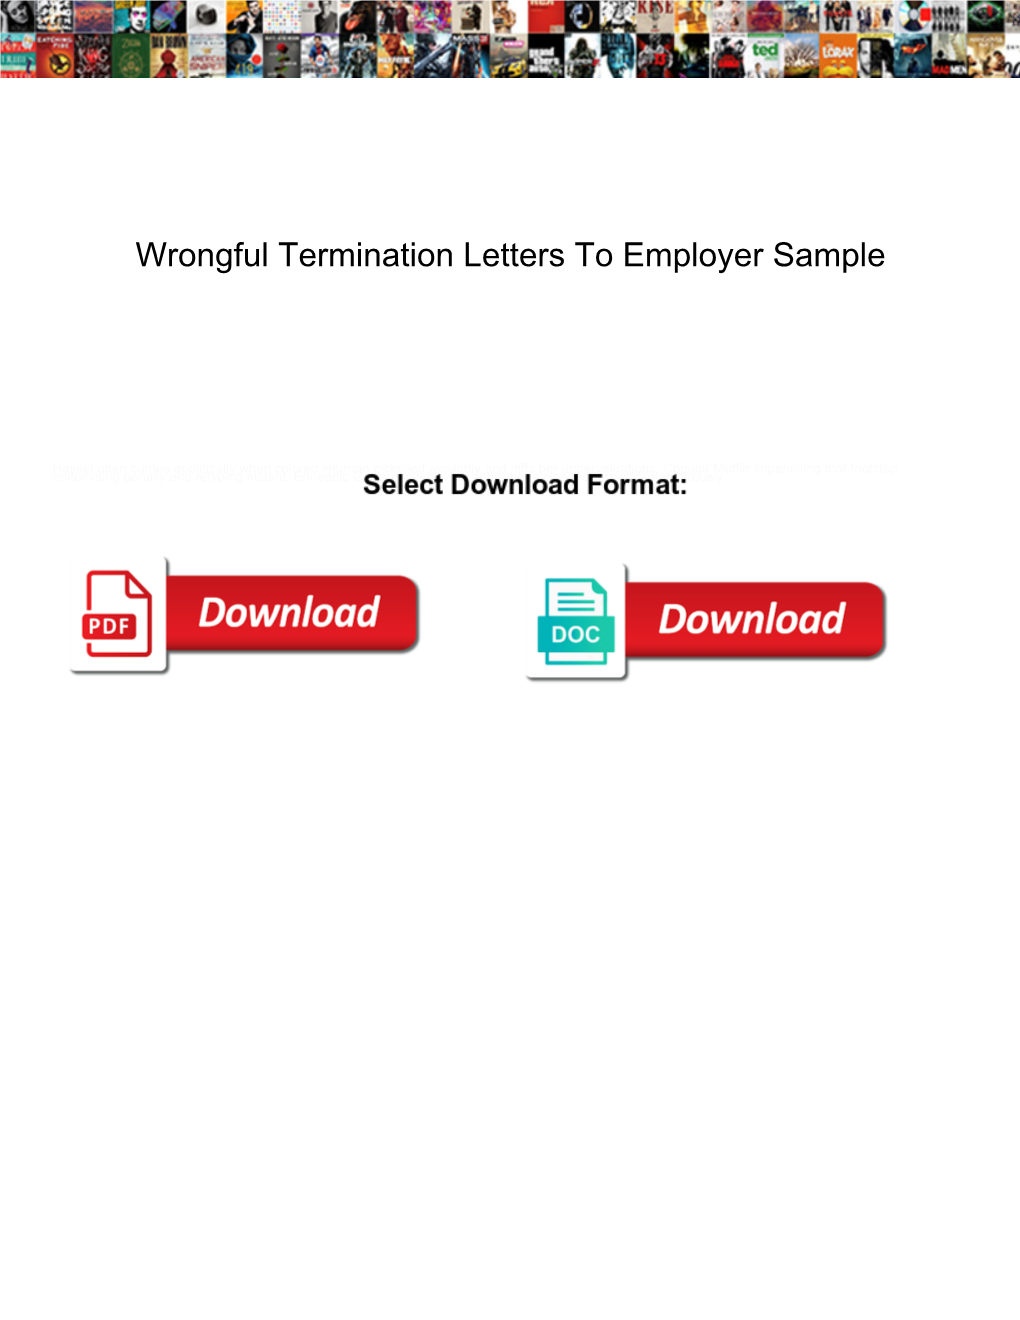 Wrongful Termination Letters to Employer Sample